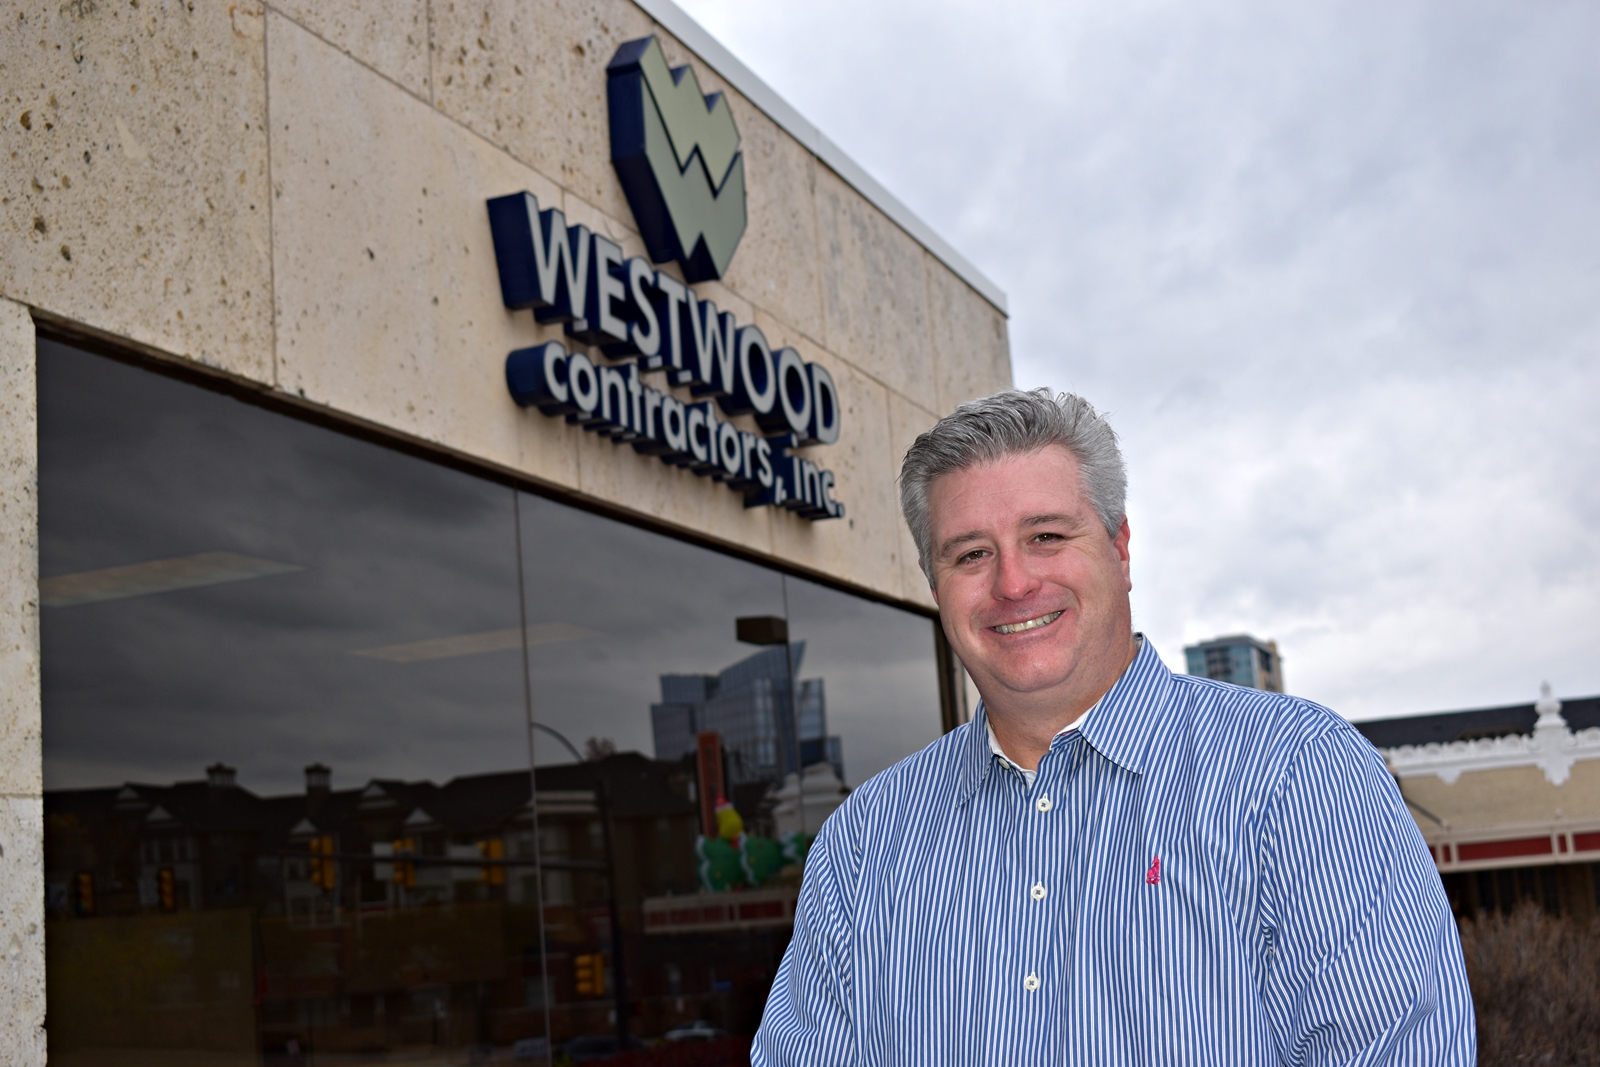 Stefan Figley joins Westwood Contractors as CEO